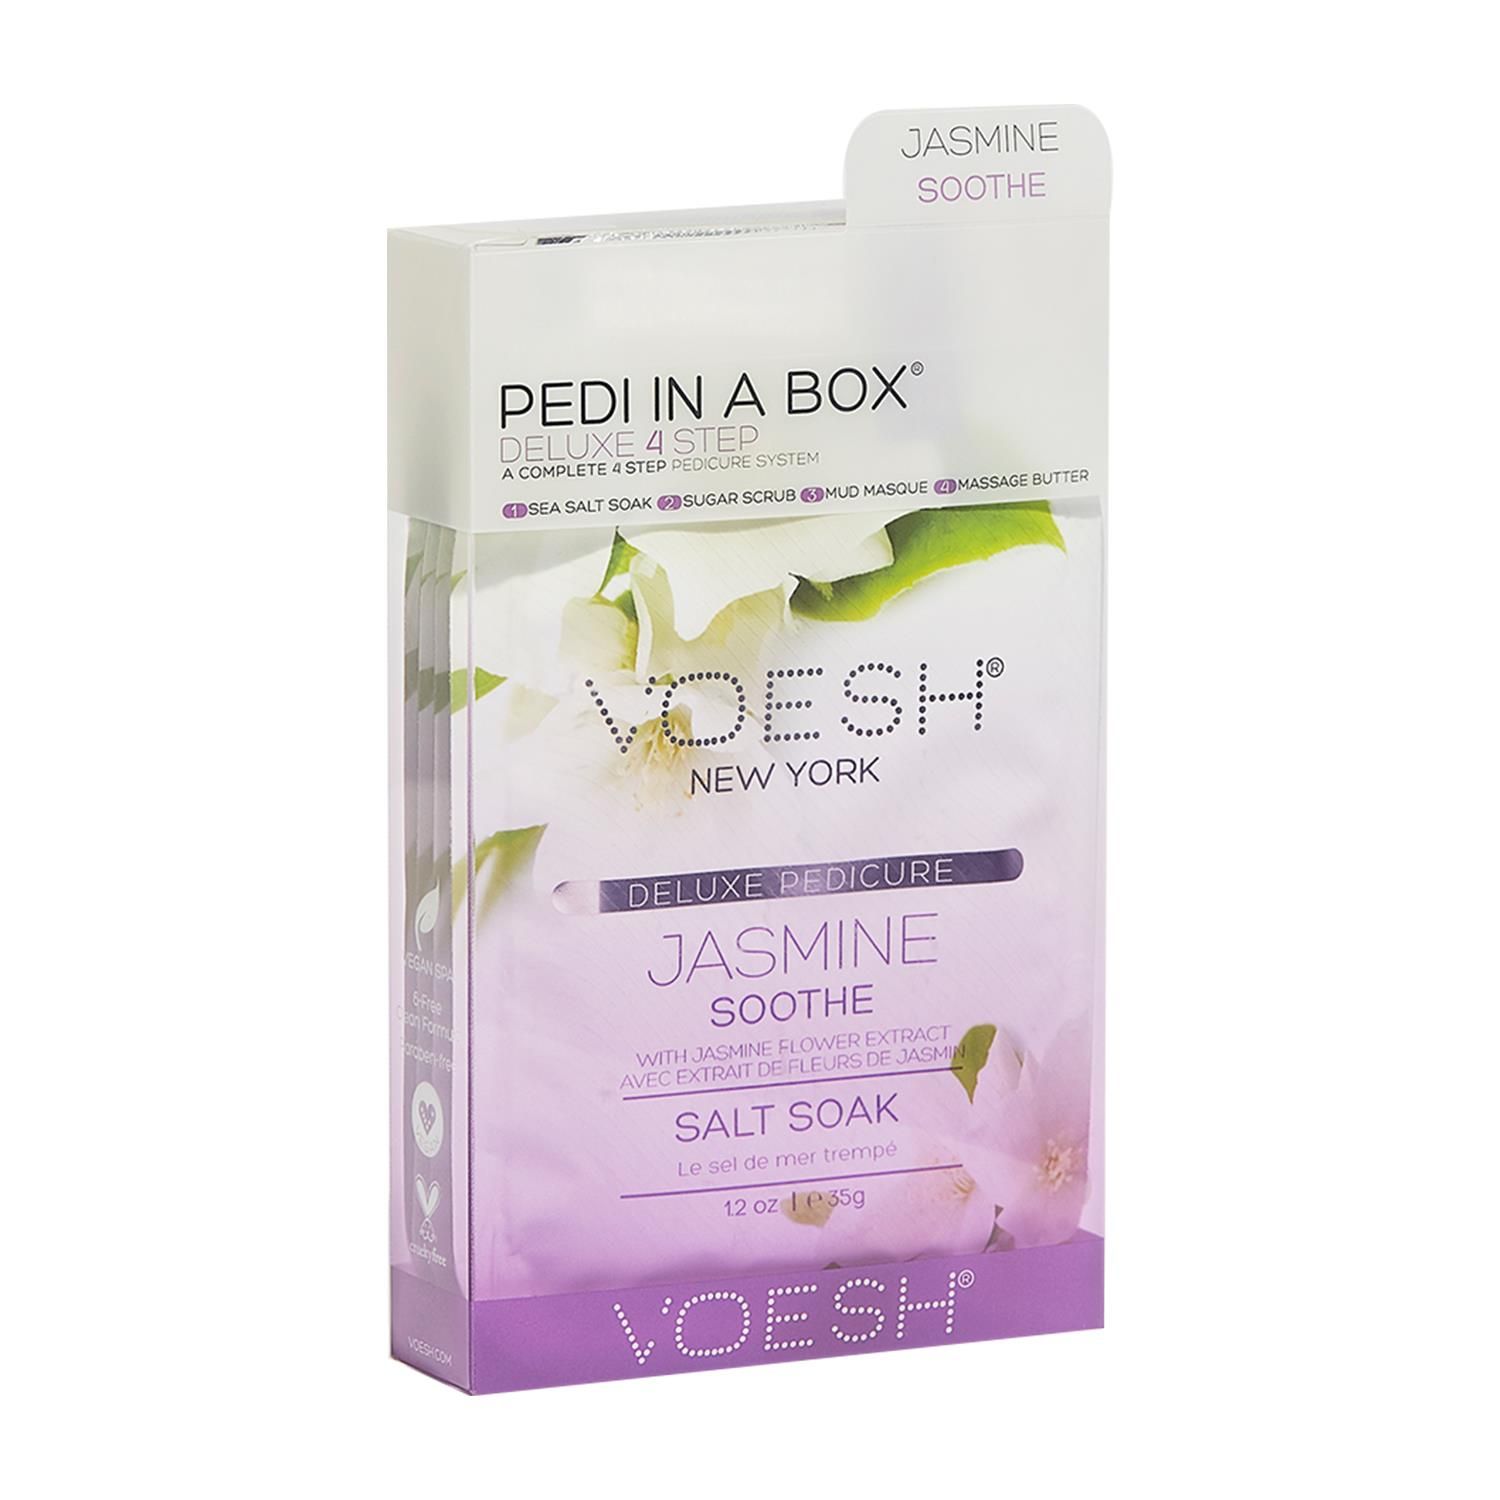 Voesh Jasmine Soothe Deluxe 4Step Pedicure In A Box with Jasmine Petal Extract.  The Cleanest And Most Hygienic Spa Pedicure Solution. Enriched With Key Ingredients To Give Your Feet The Nutrition It Needs. Each Product Is Individually Packed With The Right Amount For A Single Pedicure.

The Perfect Pedi For:
DIY At-Home Pedicure
Date Night
Bachelorette Parties
Girls’ Night In

The kit contains:
Sea Salt Soak: This soak helps relieve tension, stiffness, minor aches and discomfort in your feet. It helps detox and deodorize the feet.
Sugar Scrub: The scrub gently exfoliates dead skin cells and helps soften your feet. Perfect for use on the soles on your feet.
Mud Masque: The masque removes deep-seated impurities in your skin leaving your feet feeling clean and revived.
Massage Cream: The massage cream hydrates and soothes skin. It softens the soles of your feet and helps prevent dryness and roughness.

4 Step Includes
Sea Salt Soak 35g: to detox & deodorize the feet.
Sugar Scrub 35g: to gently exfoliate dead skin.
Mud Masque 35g: to deep cleanse impurities.
Massage Butter 35g: to hydrate and soothe skin.